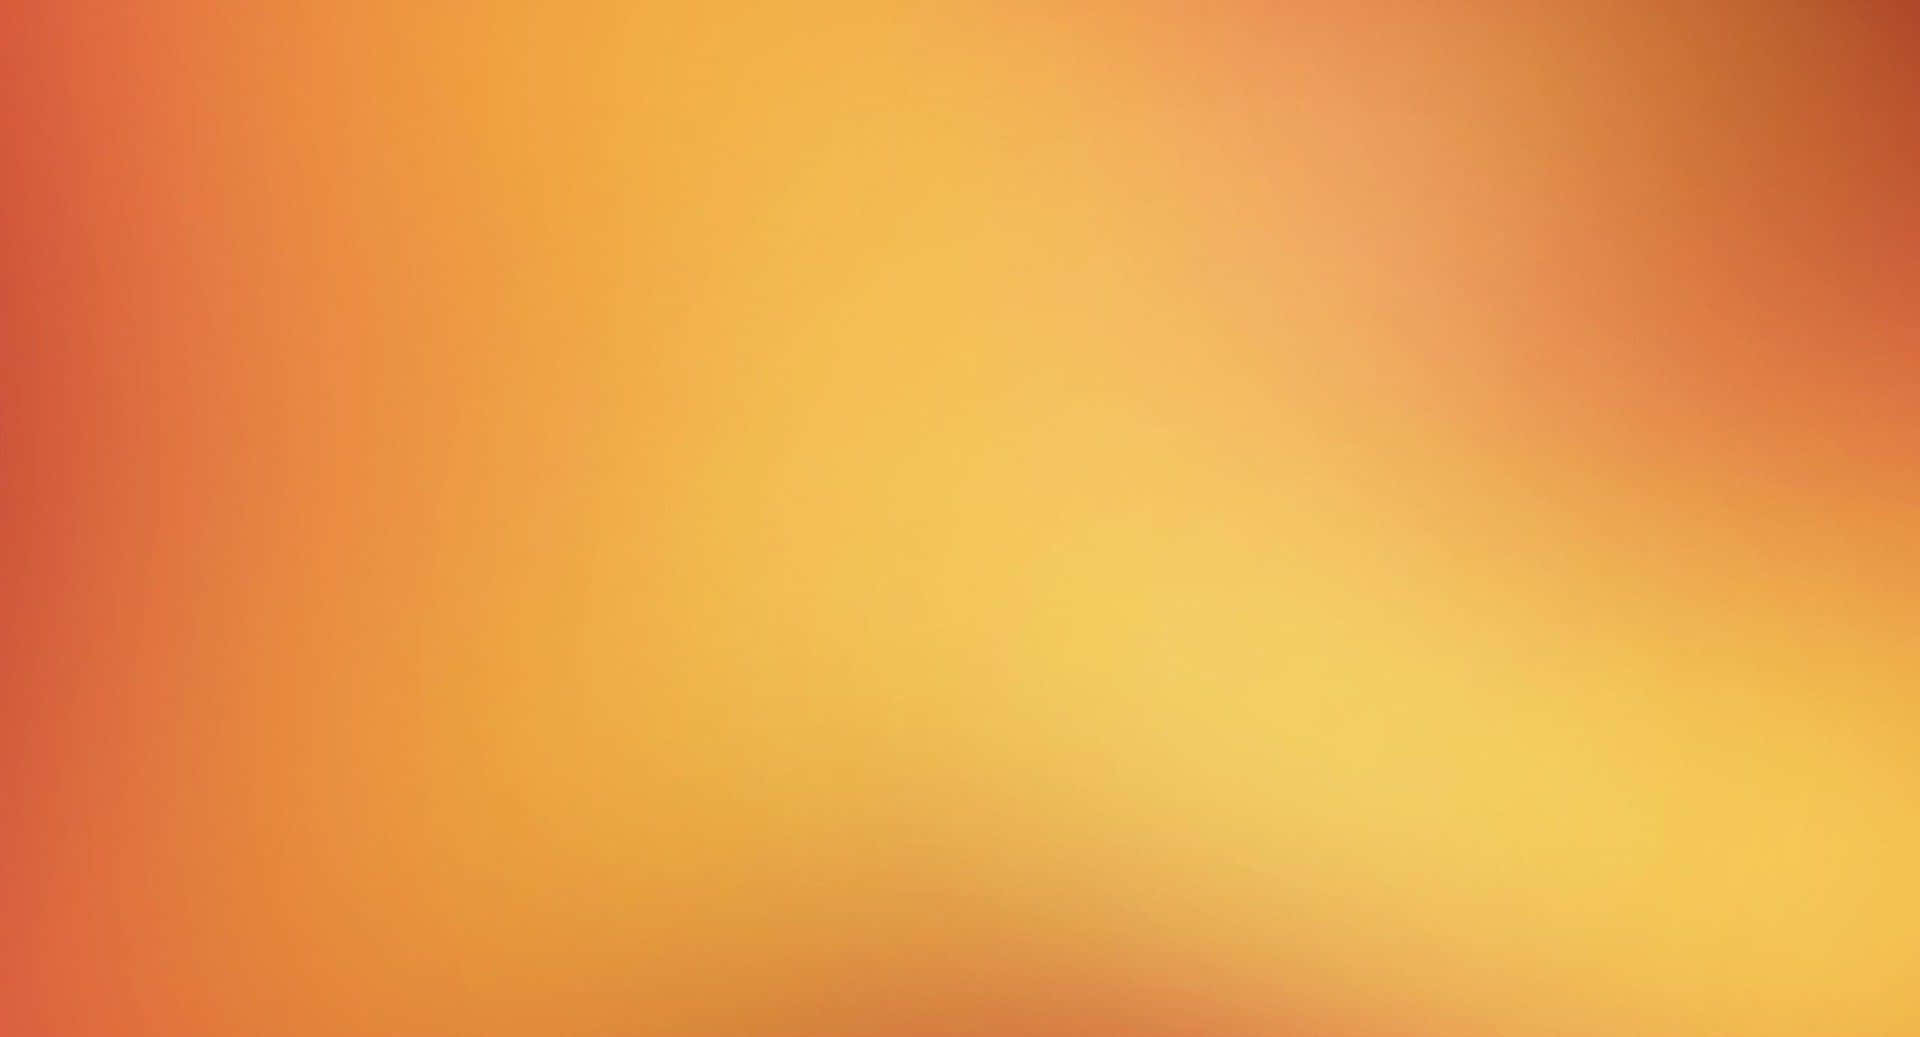 A Blurred Orange And Yellow Background